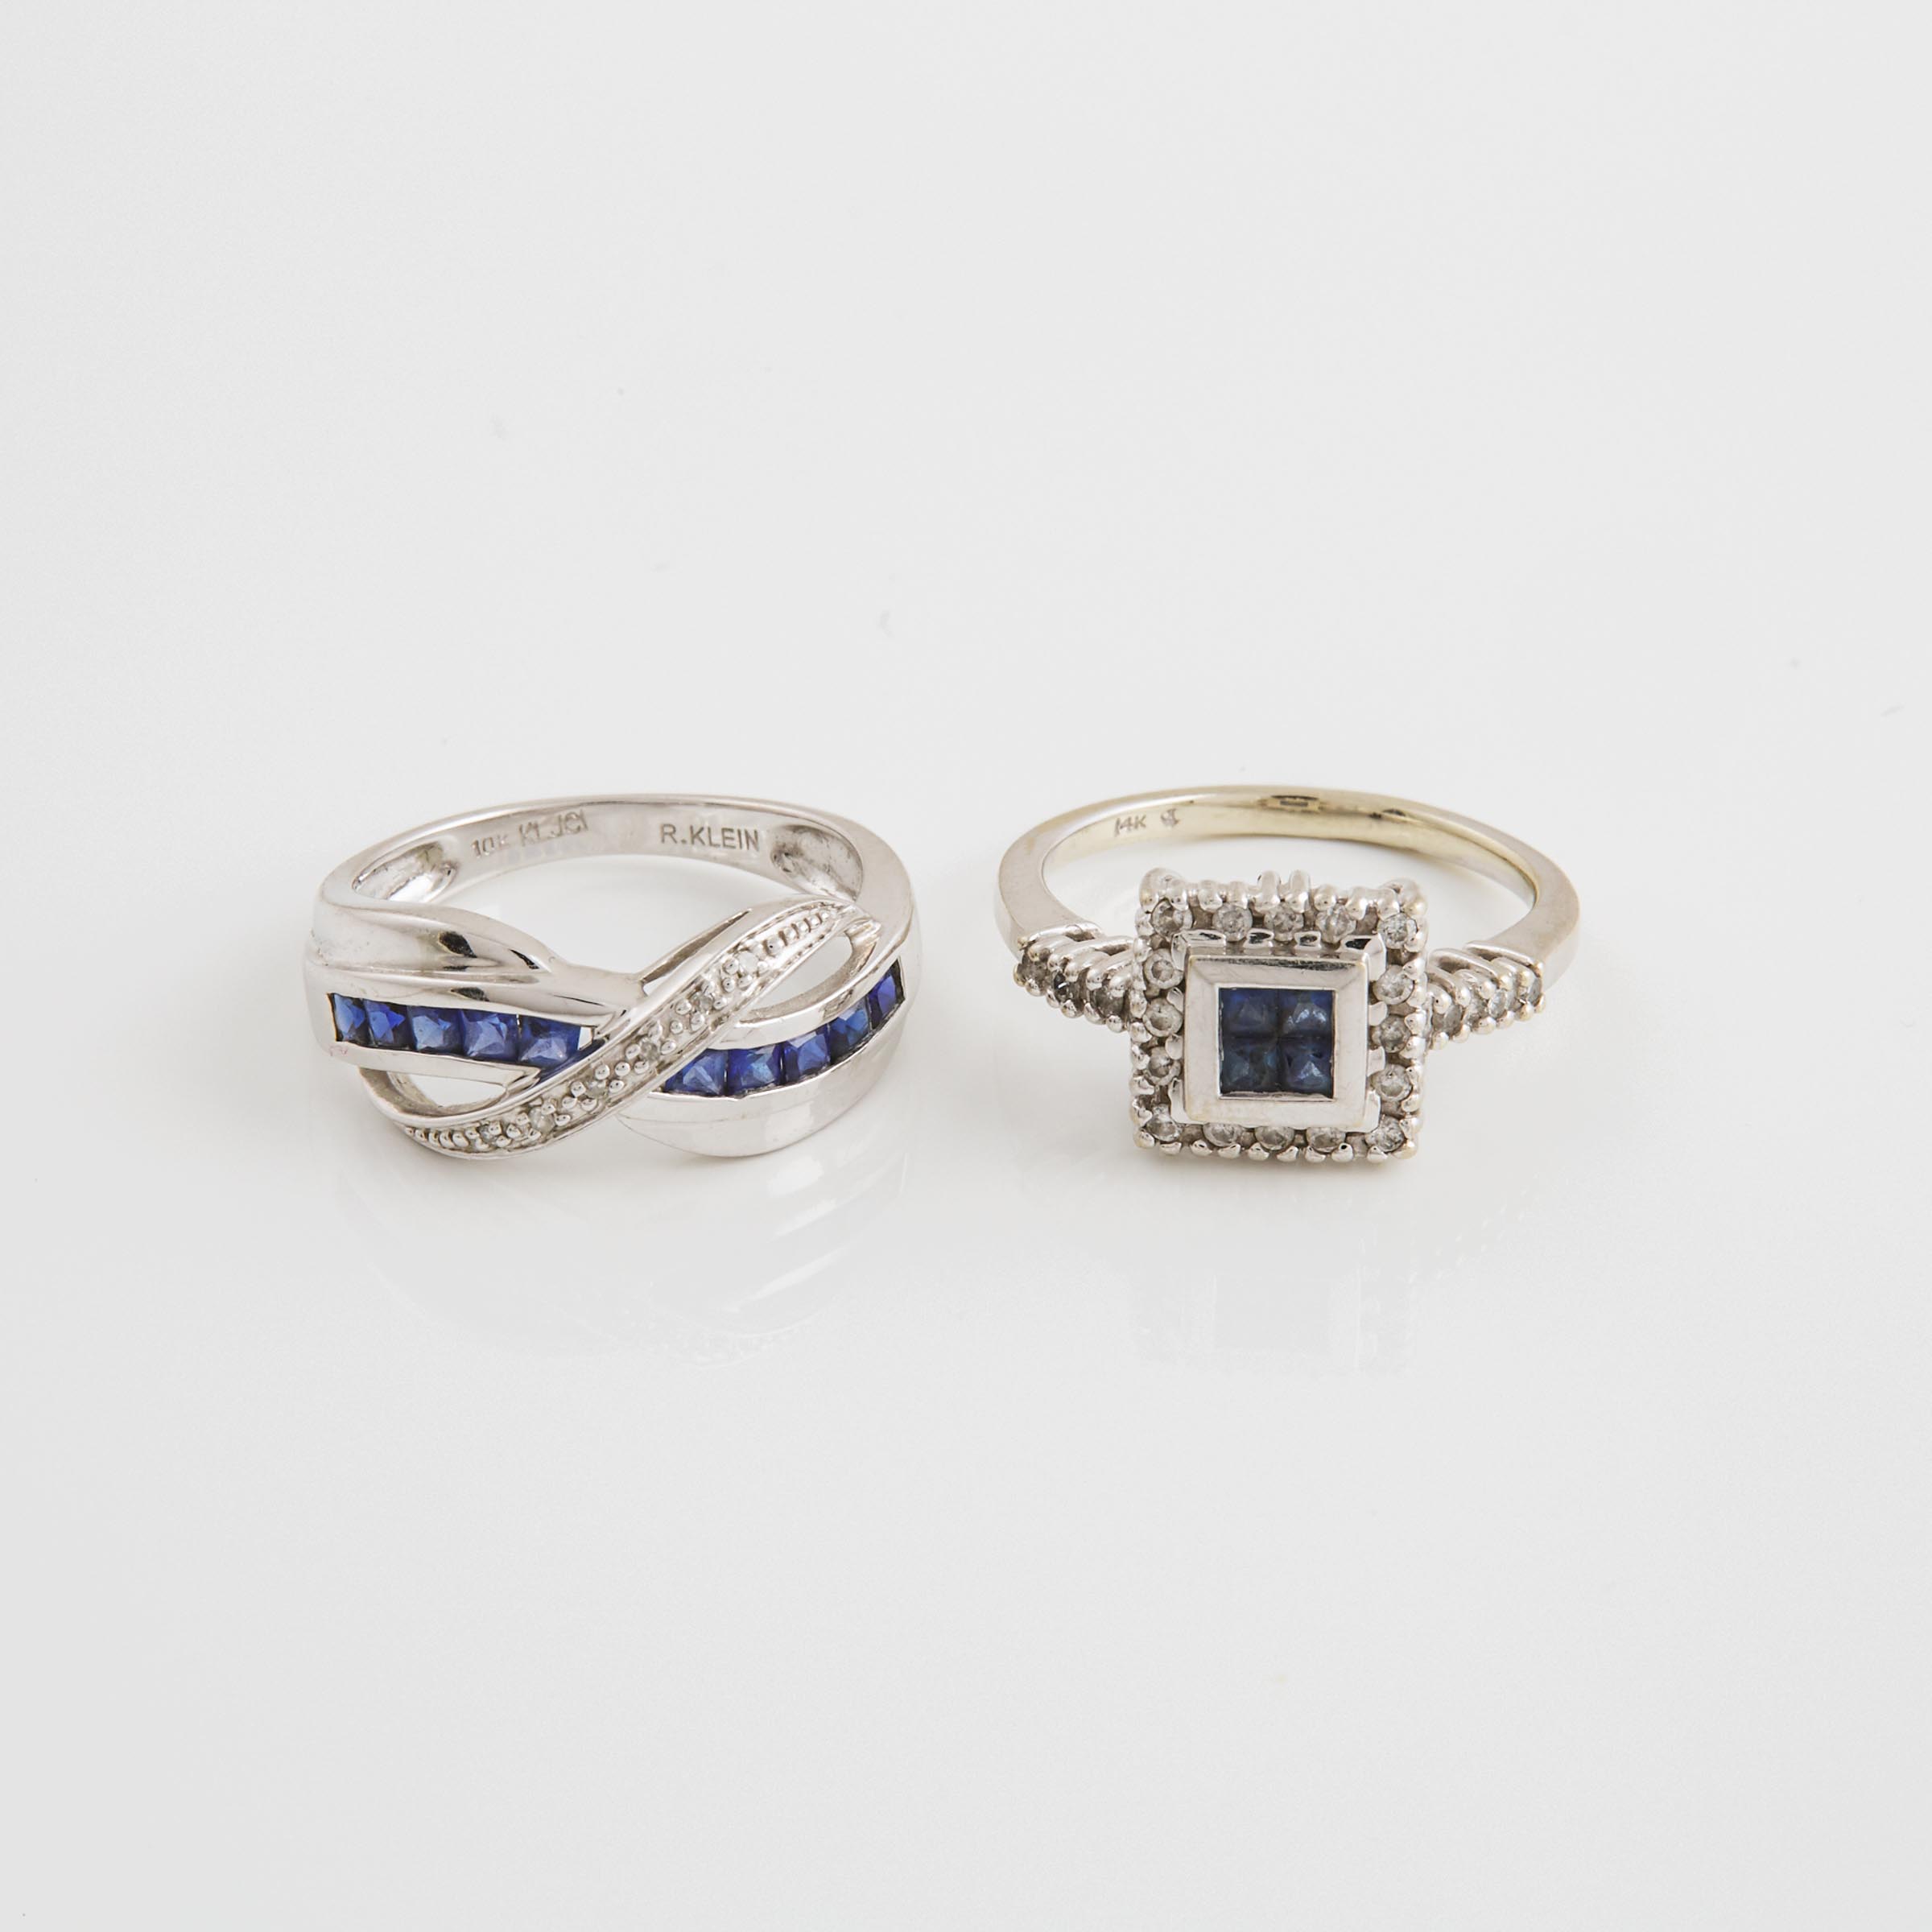 A 14k White Gold Ring And A 10k White Gold Ring